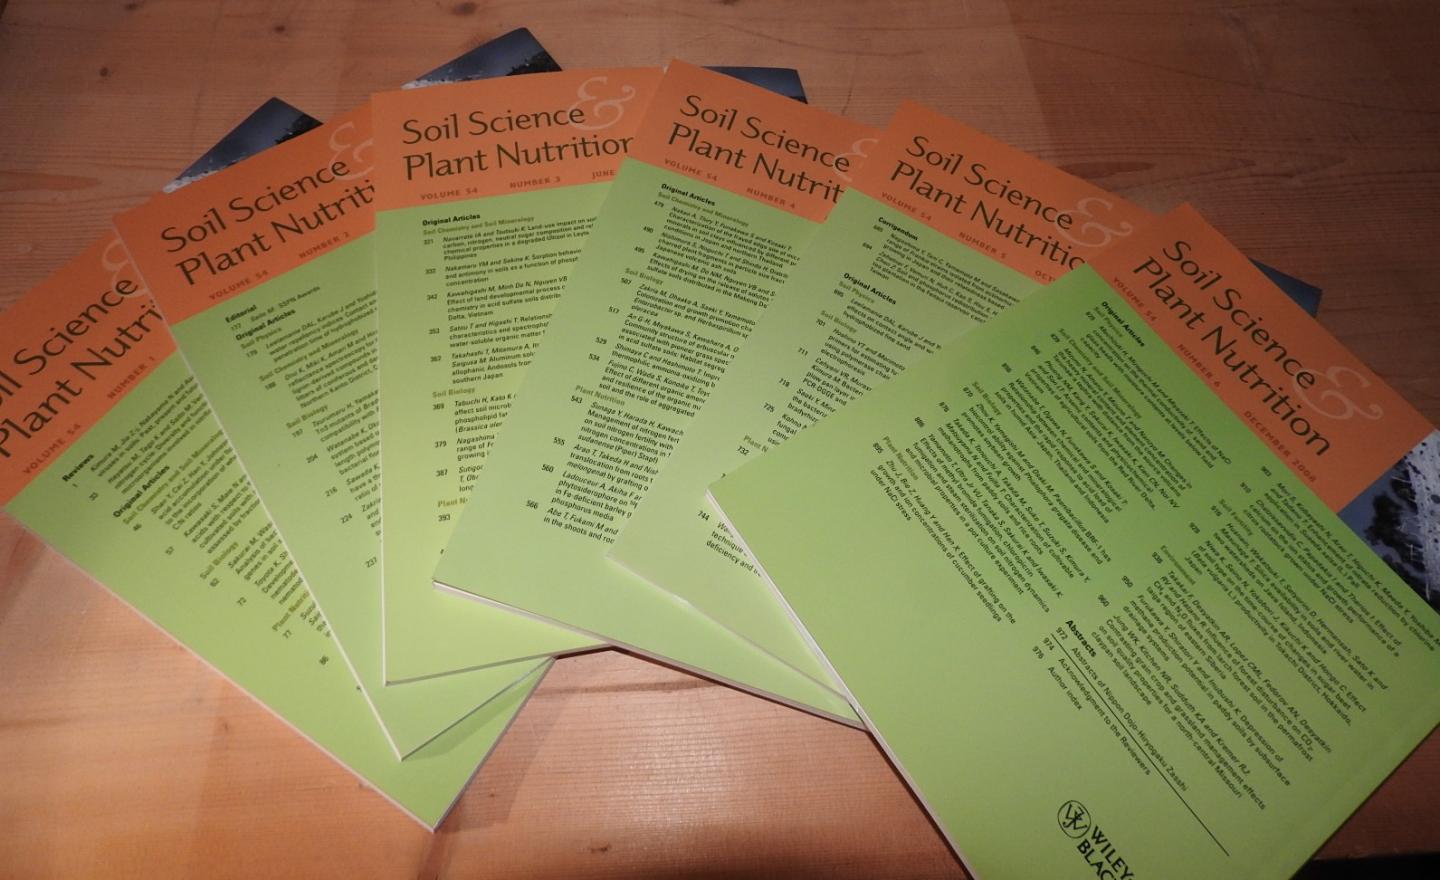  - Soil science and plant nutrition 2008 Volume 54 Complete